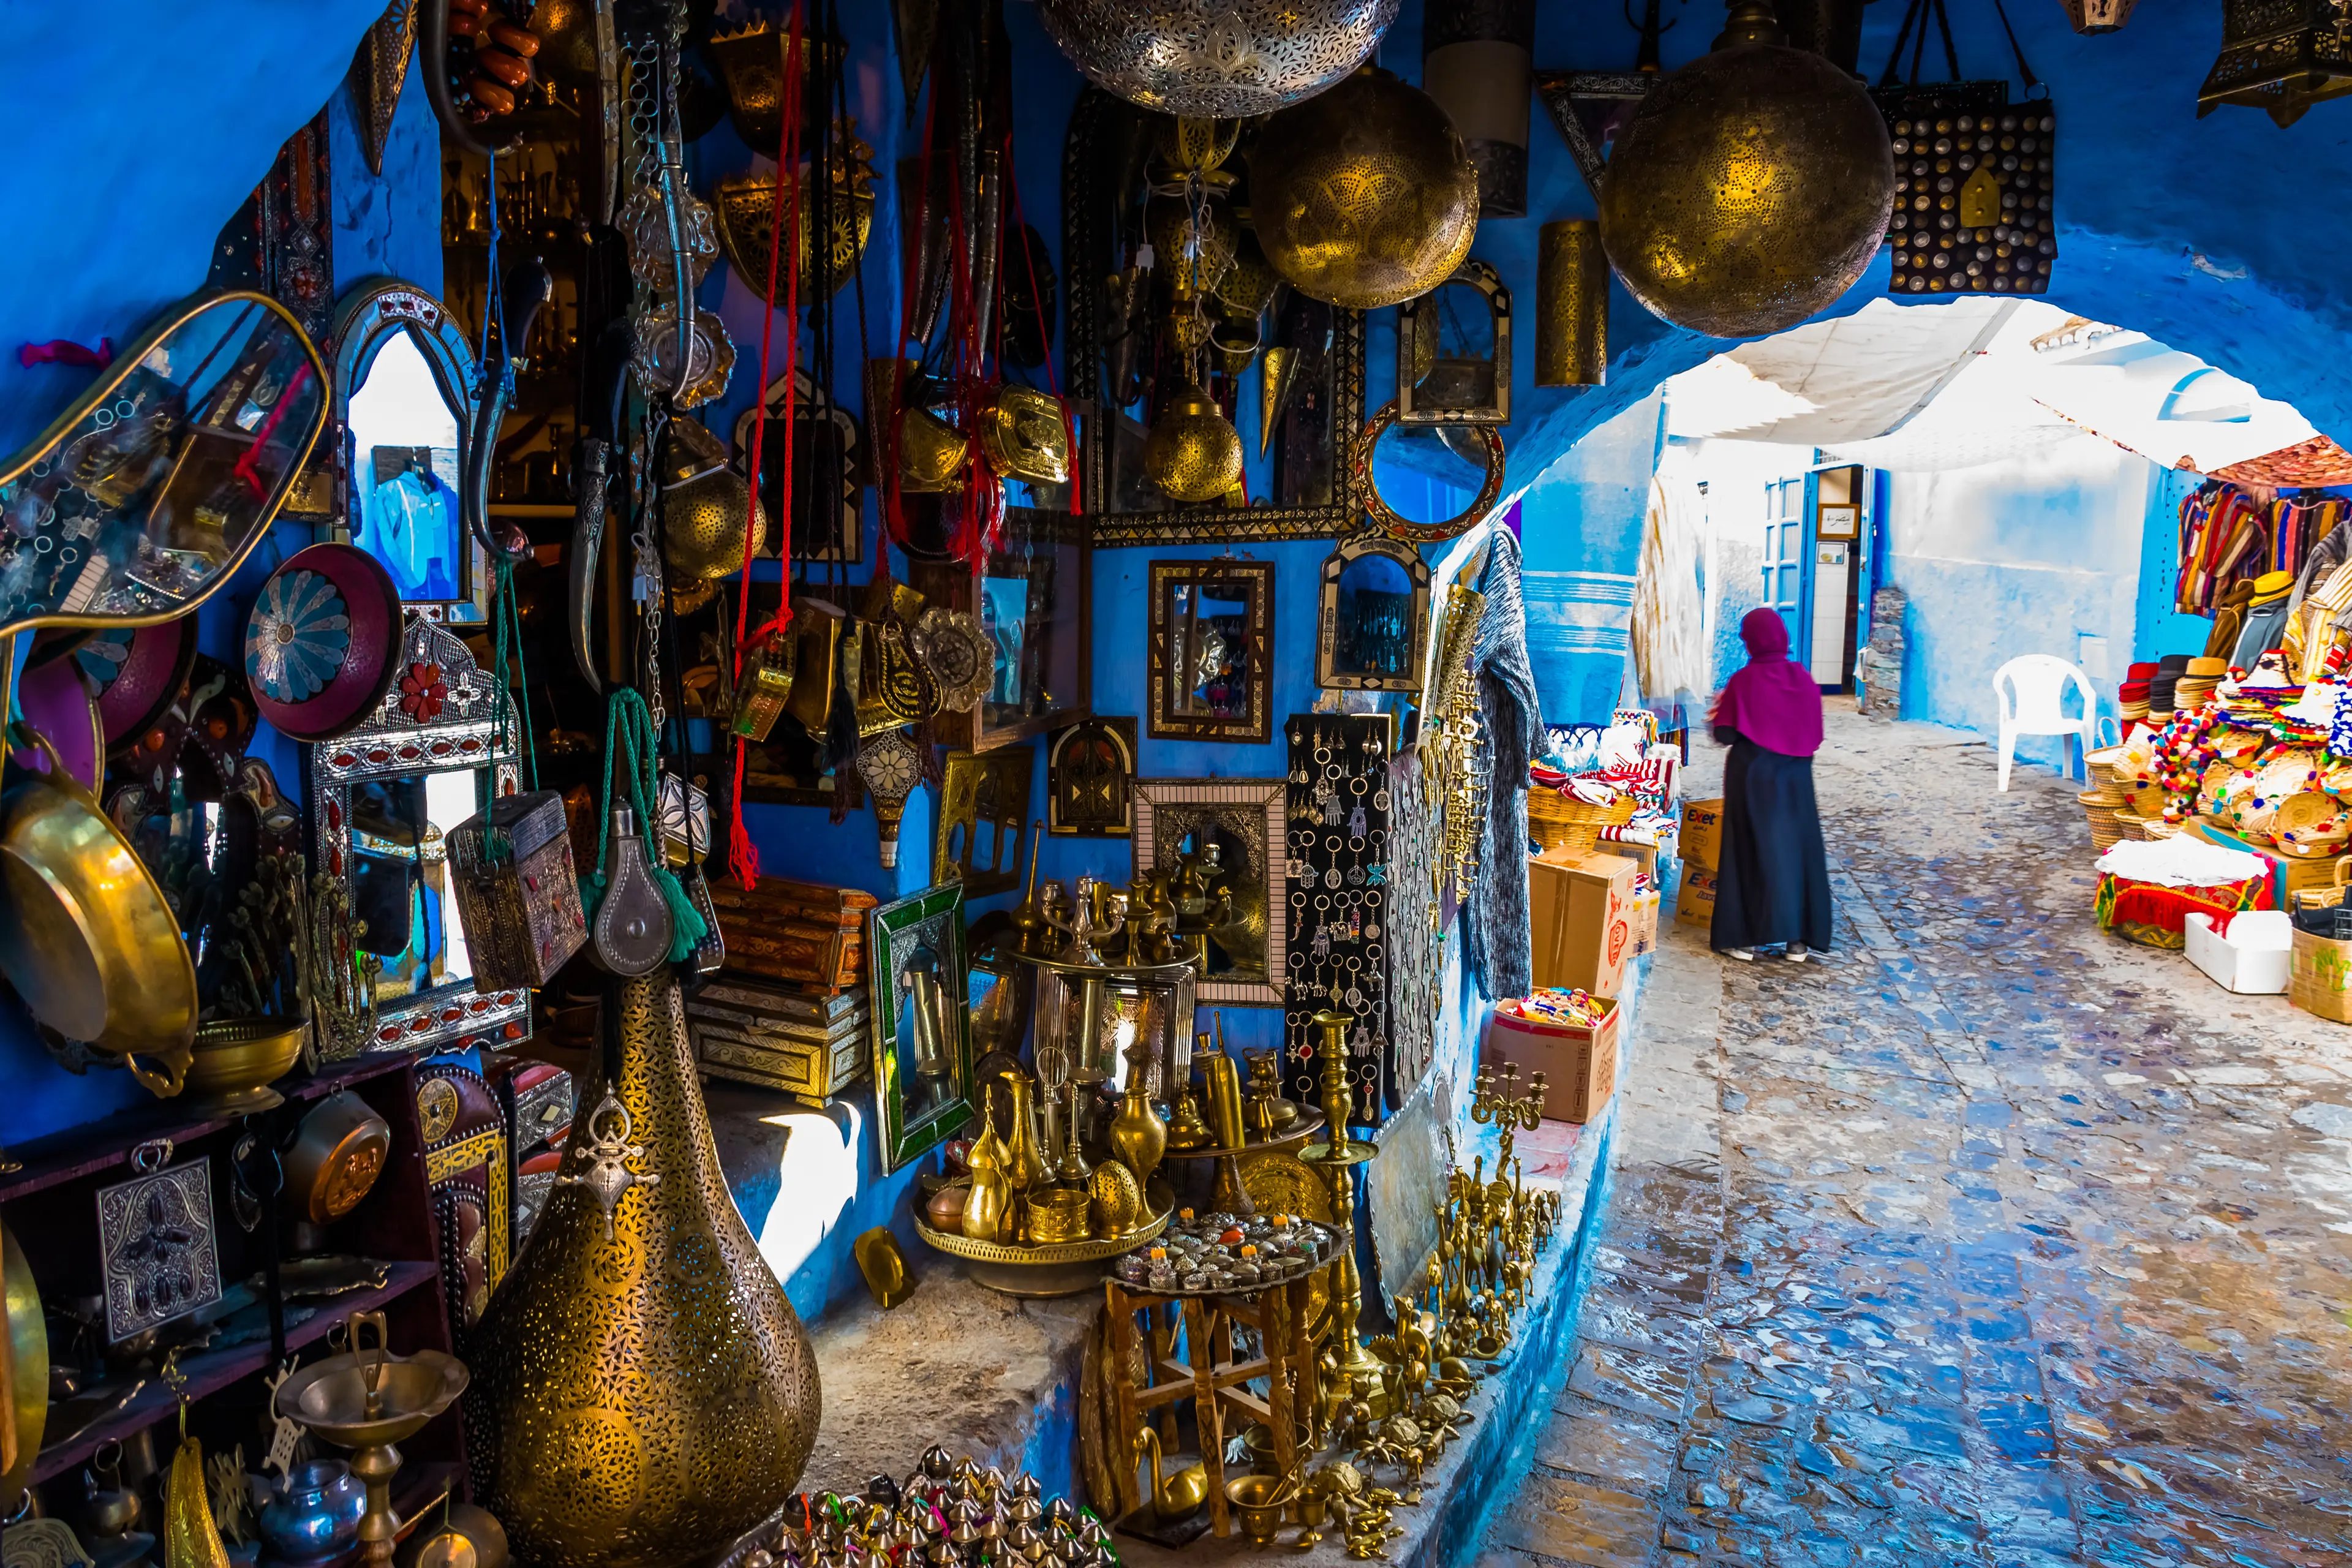 1-Day Adventure & Foodie Journey in Undiscovered Chefchaouen, Morocco